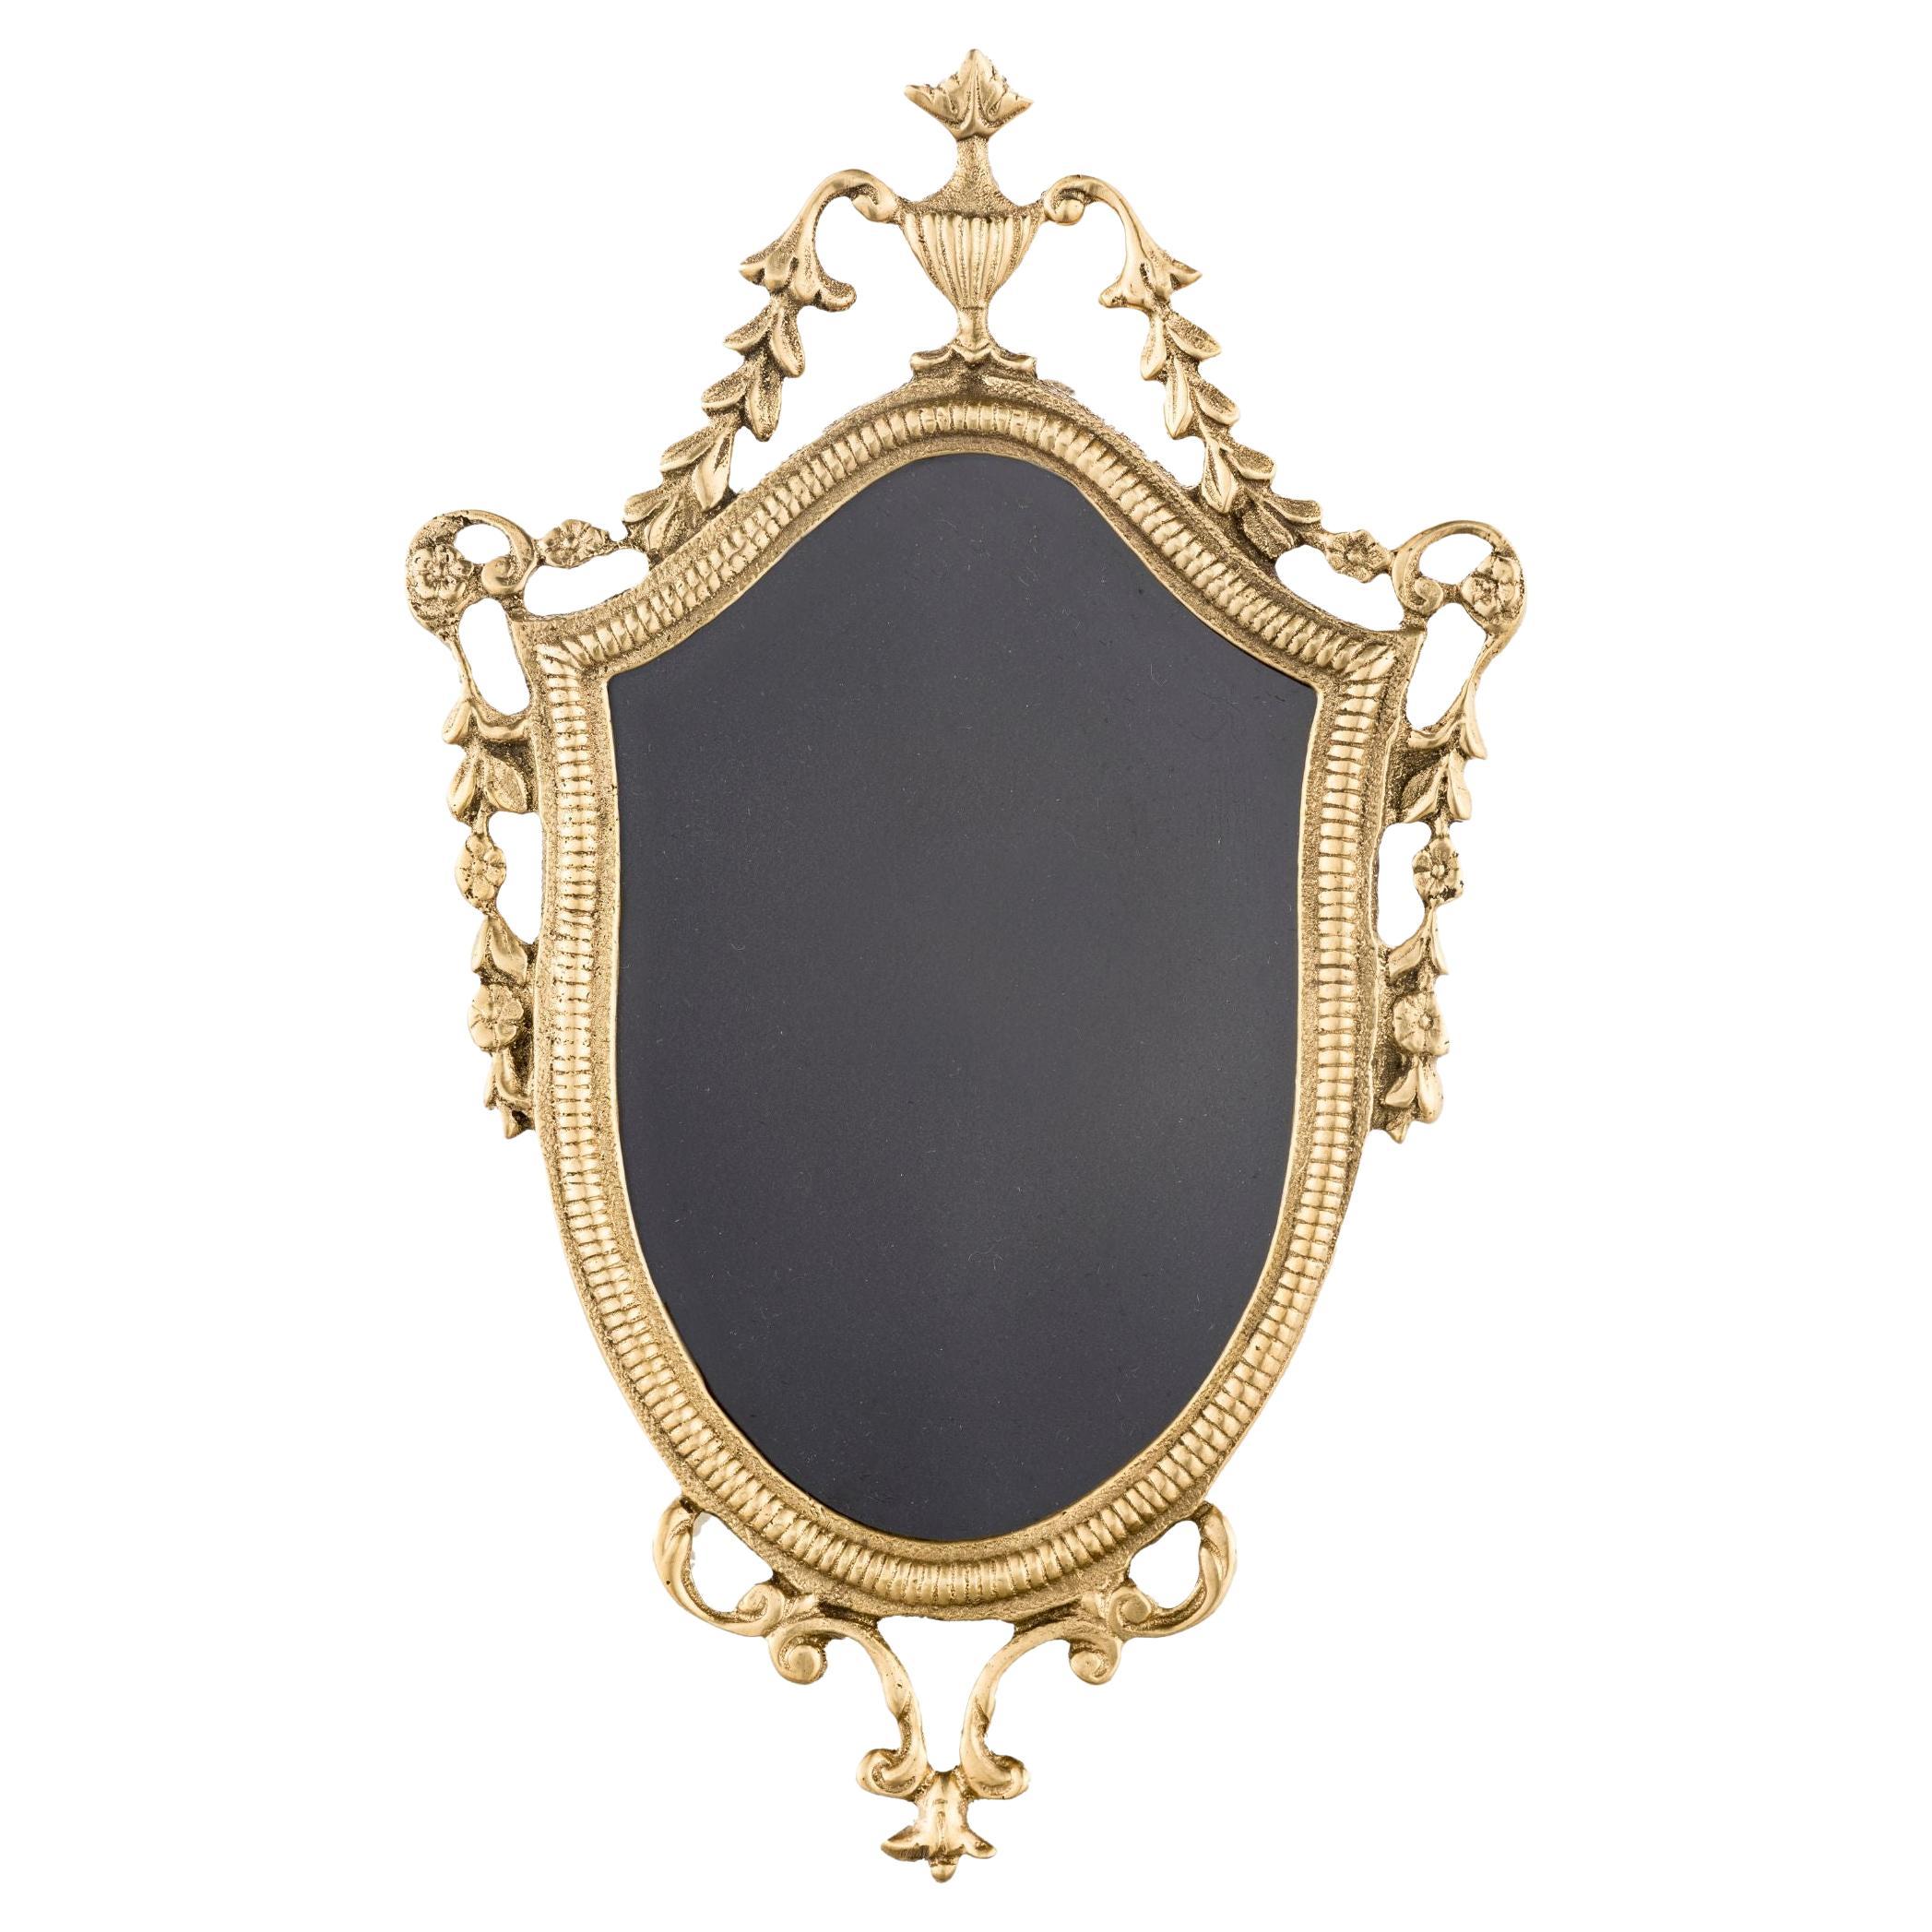 Sissi decorated baroque-style brass frame For Sale